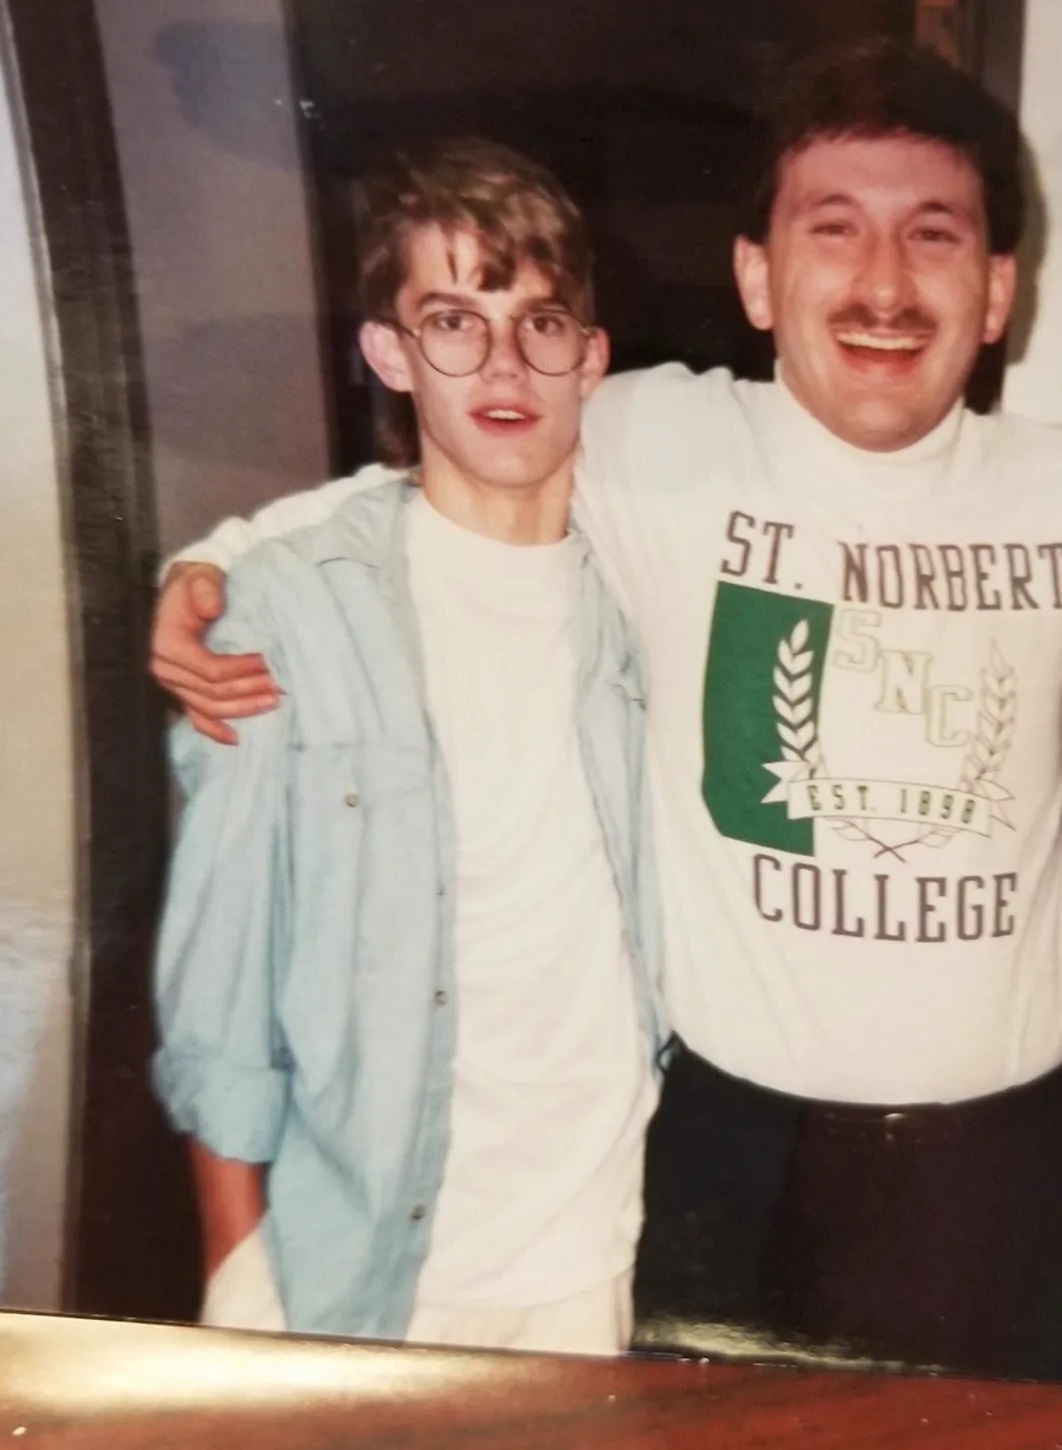 Nate Lindstrom as a teenager with the Rev. James W. Stein, a Norbertine priest who later was convicted twice of sex crimes. Provided